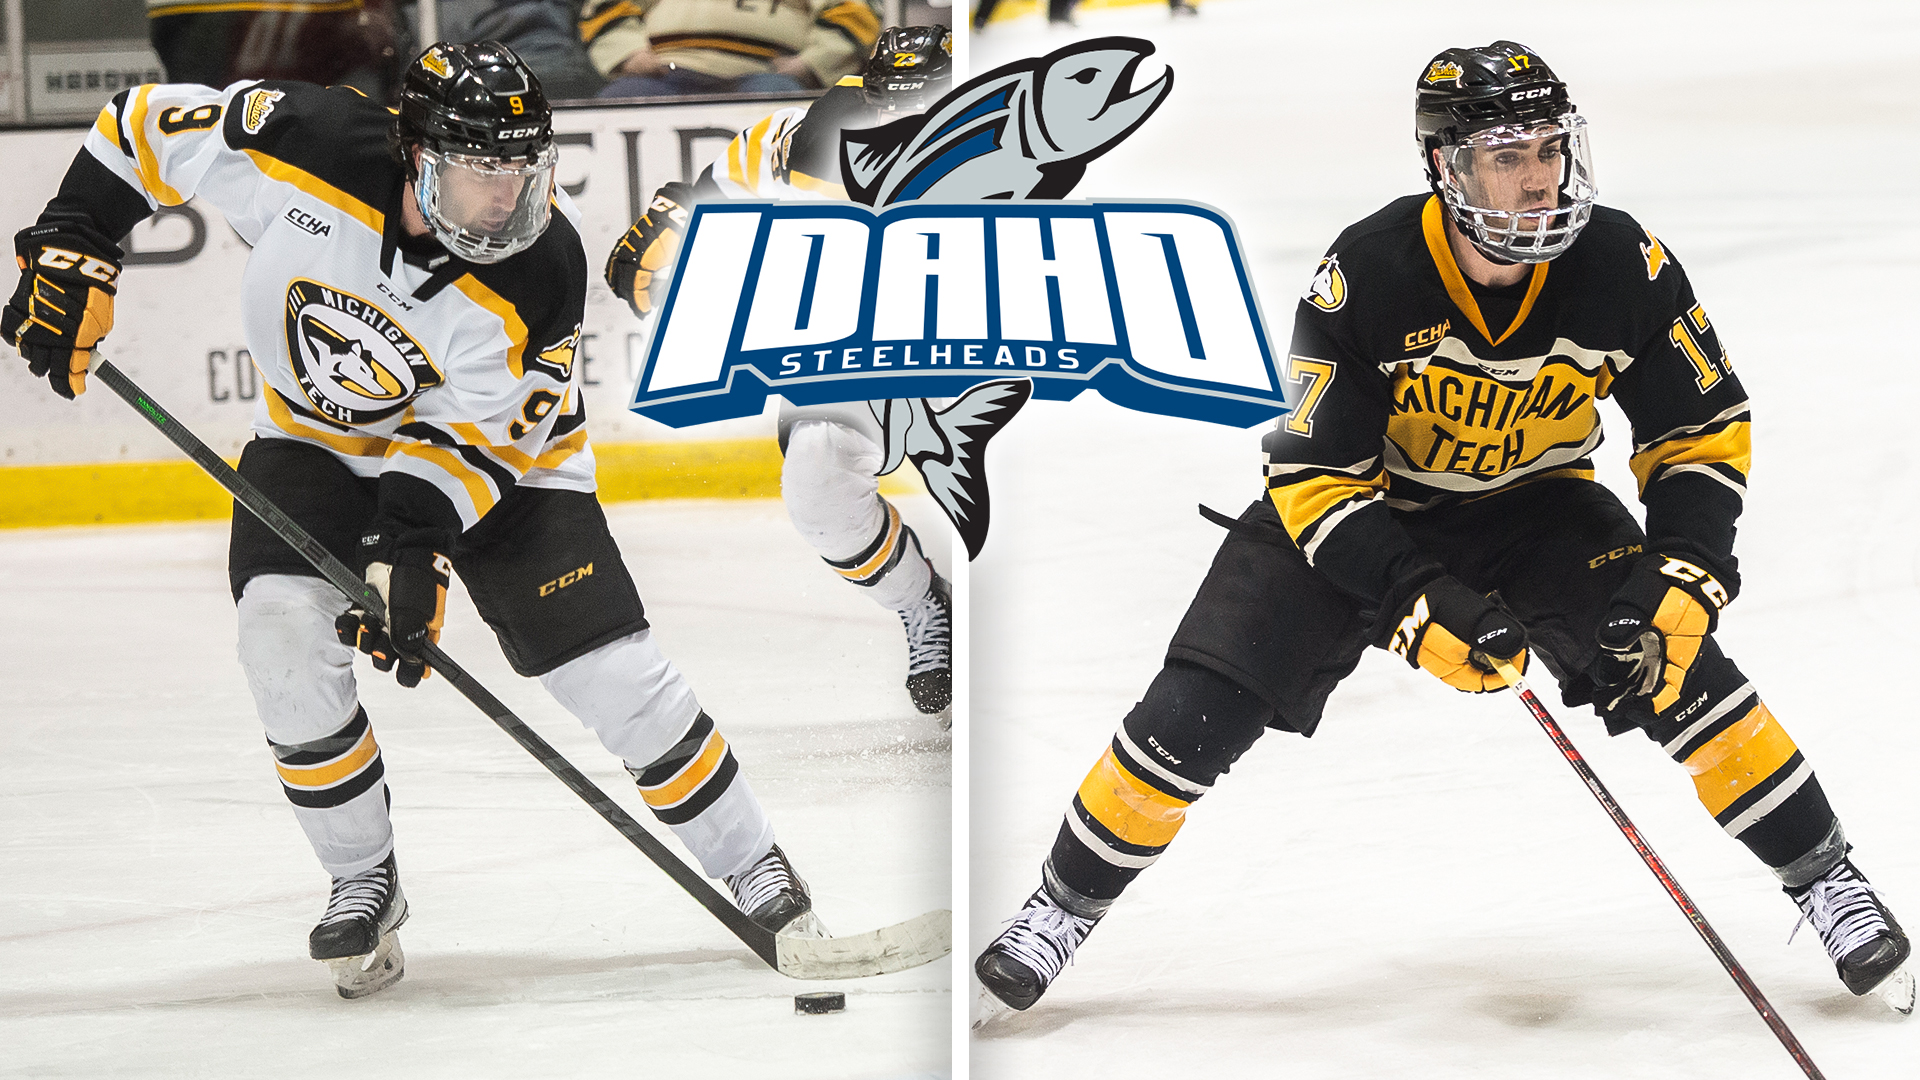 Misiak and Parrottino sign with Idaho in ECHL